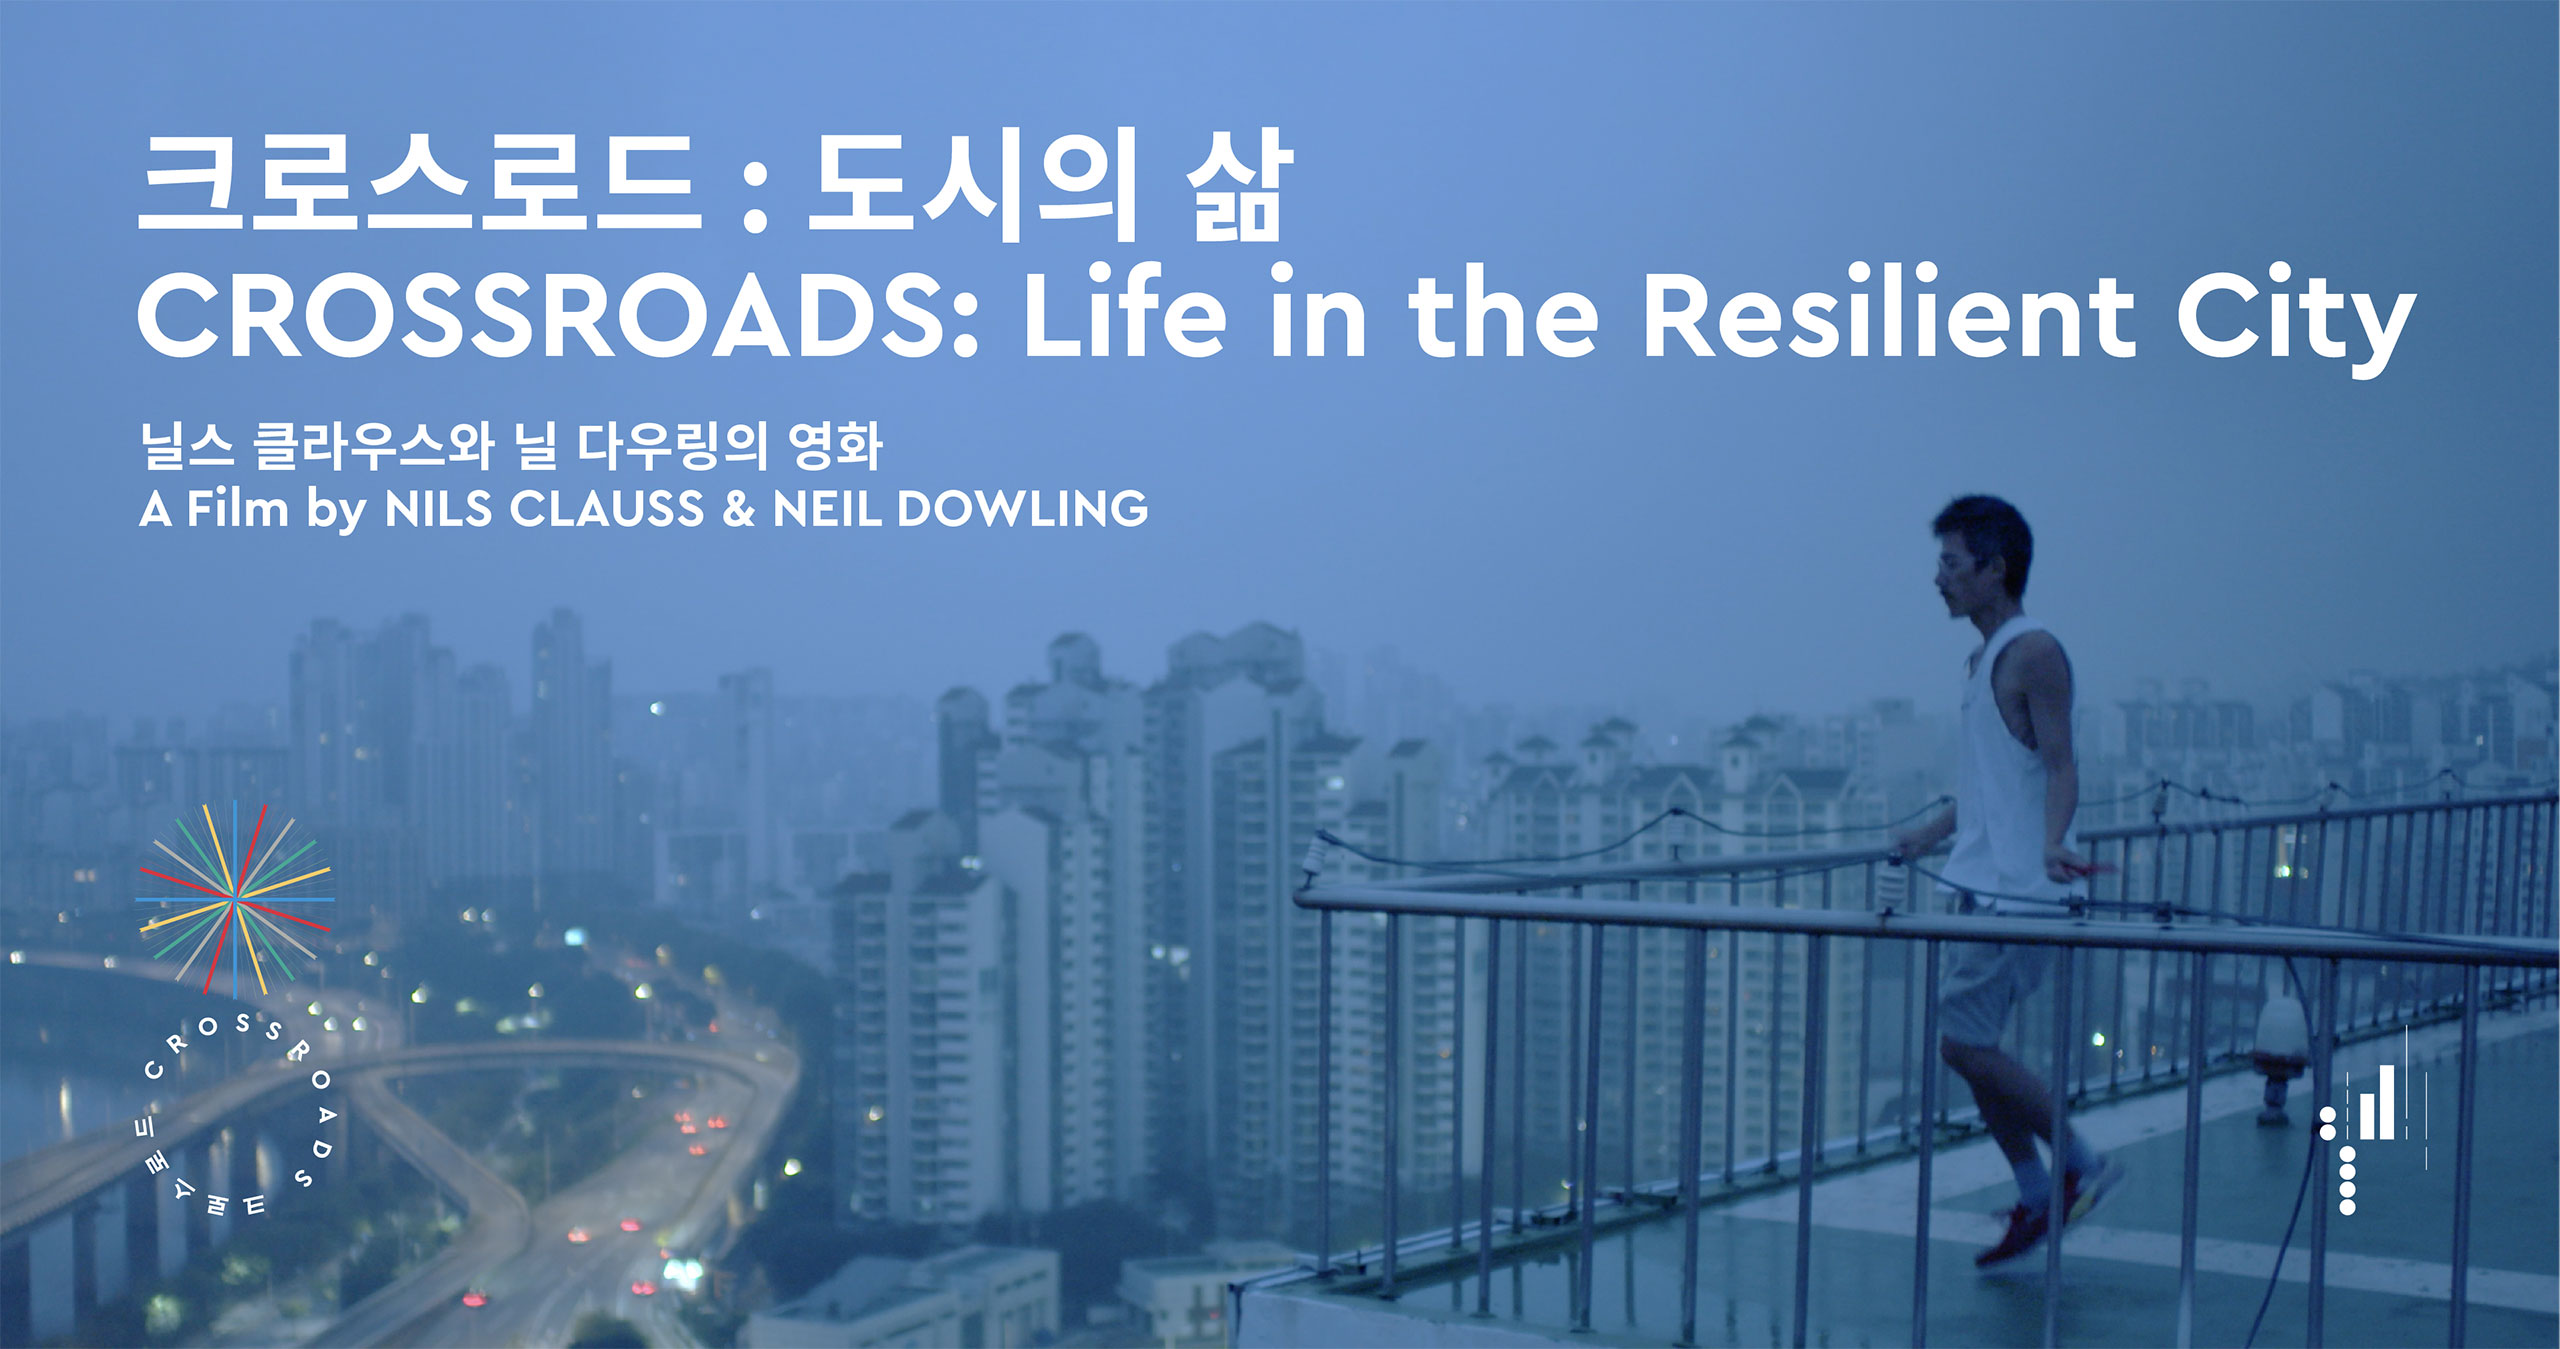 CROSSROADS: Life in the Resilient City. Film still. 